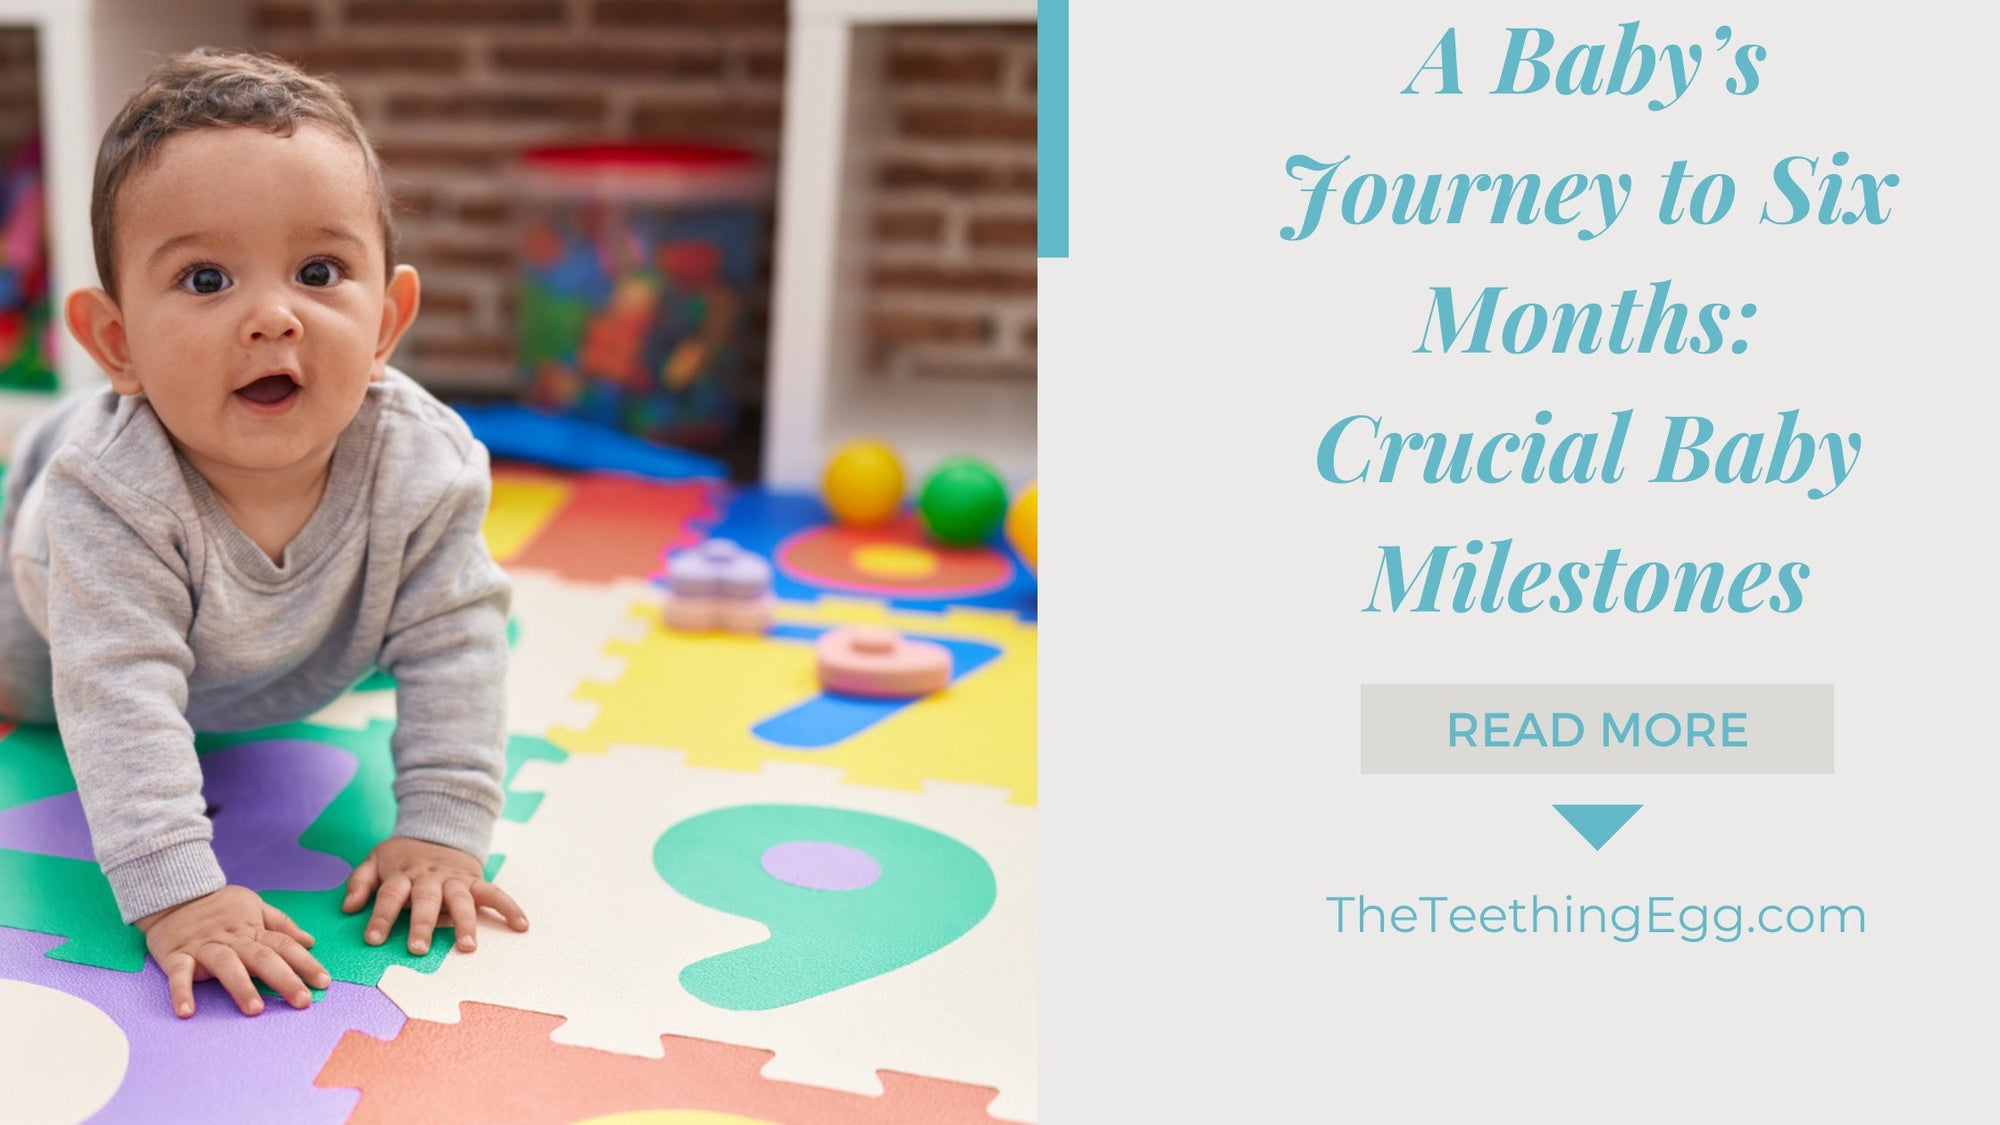 A Baby’s Journey to Six Months: Crucial Baby Milestones